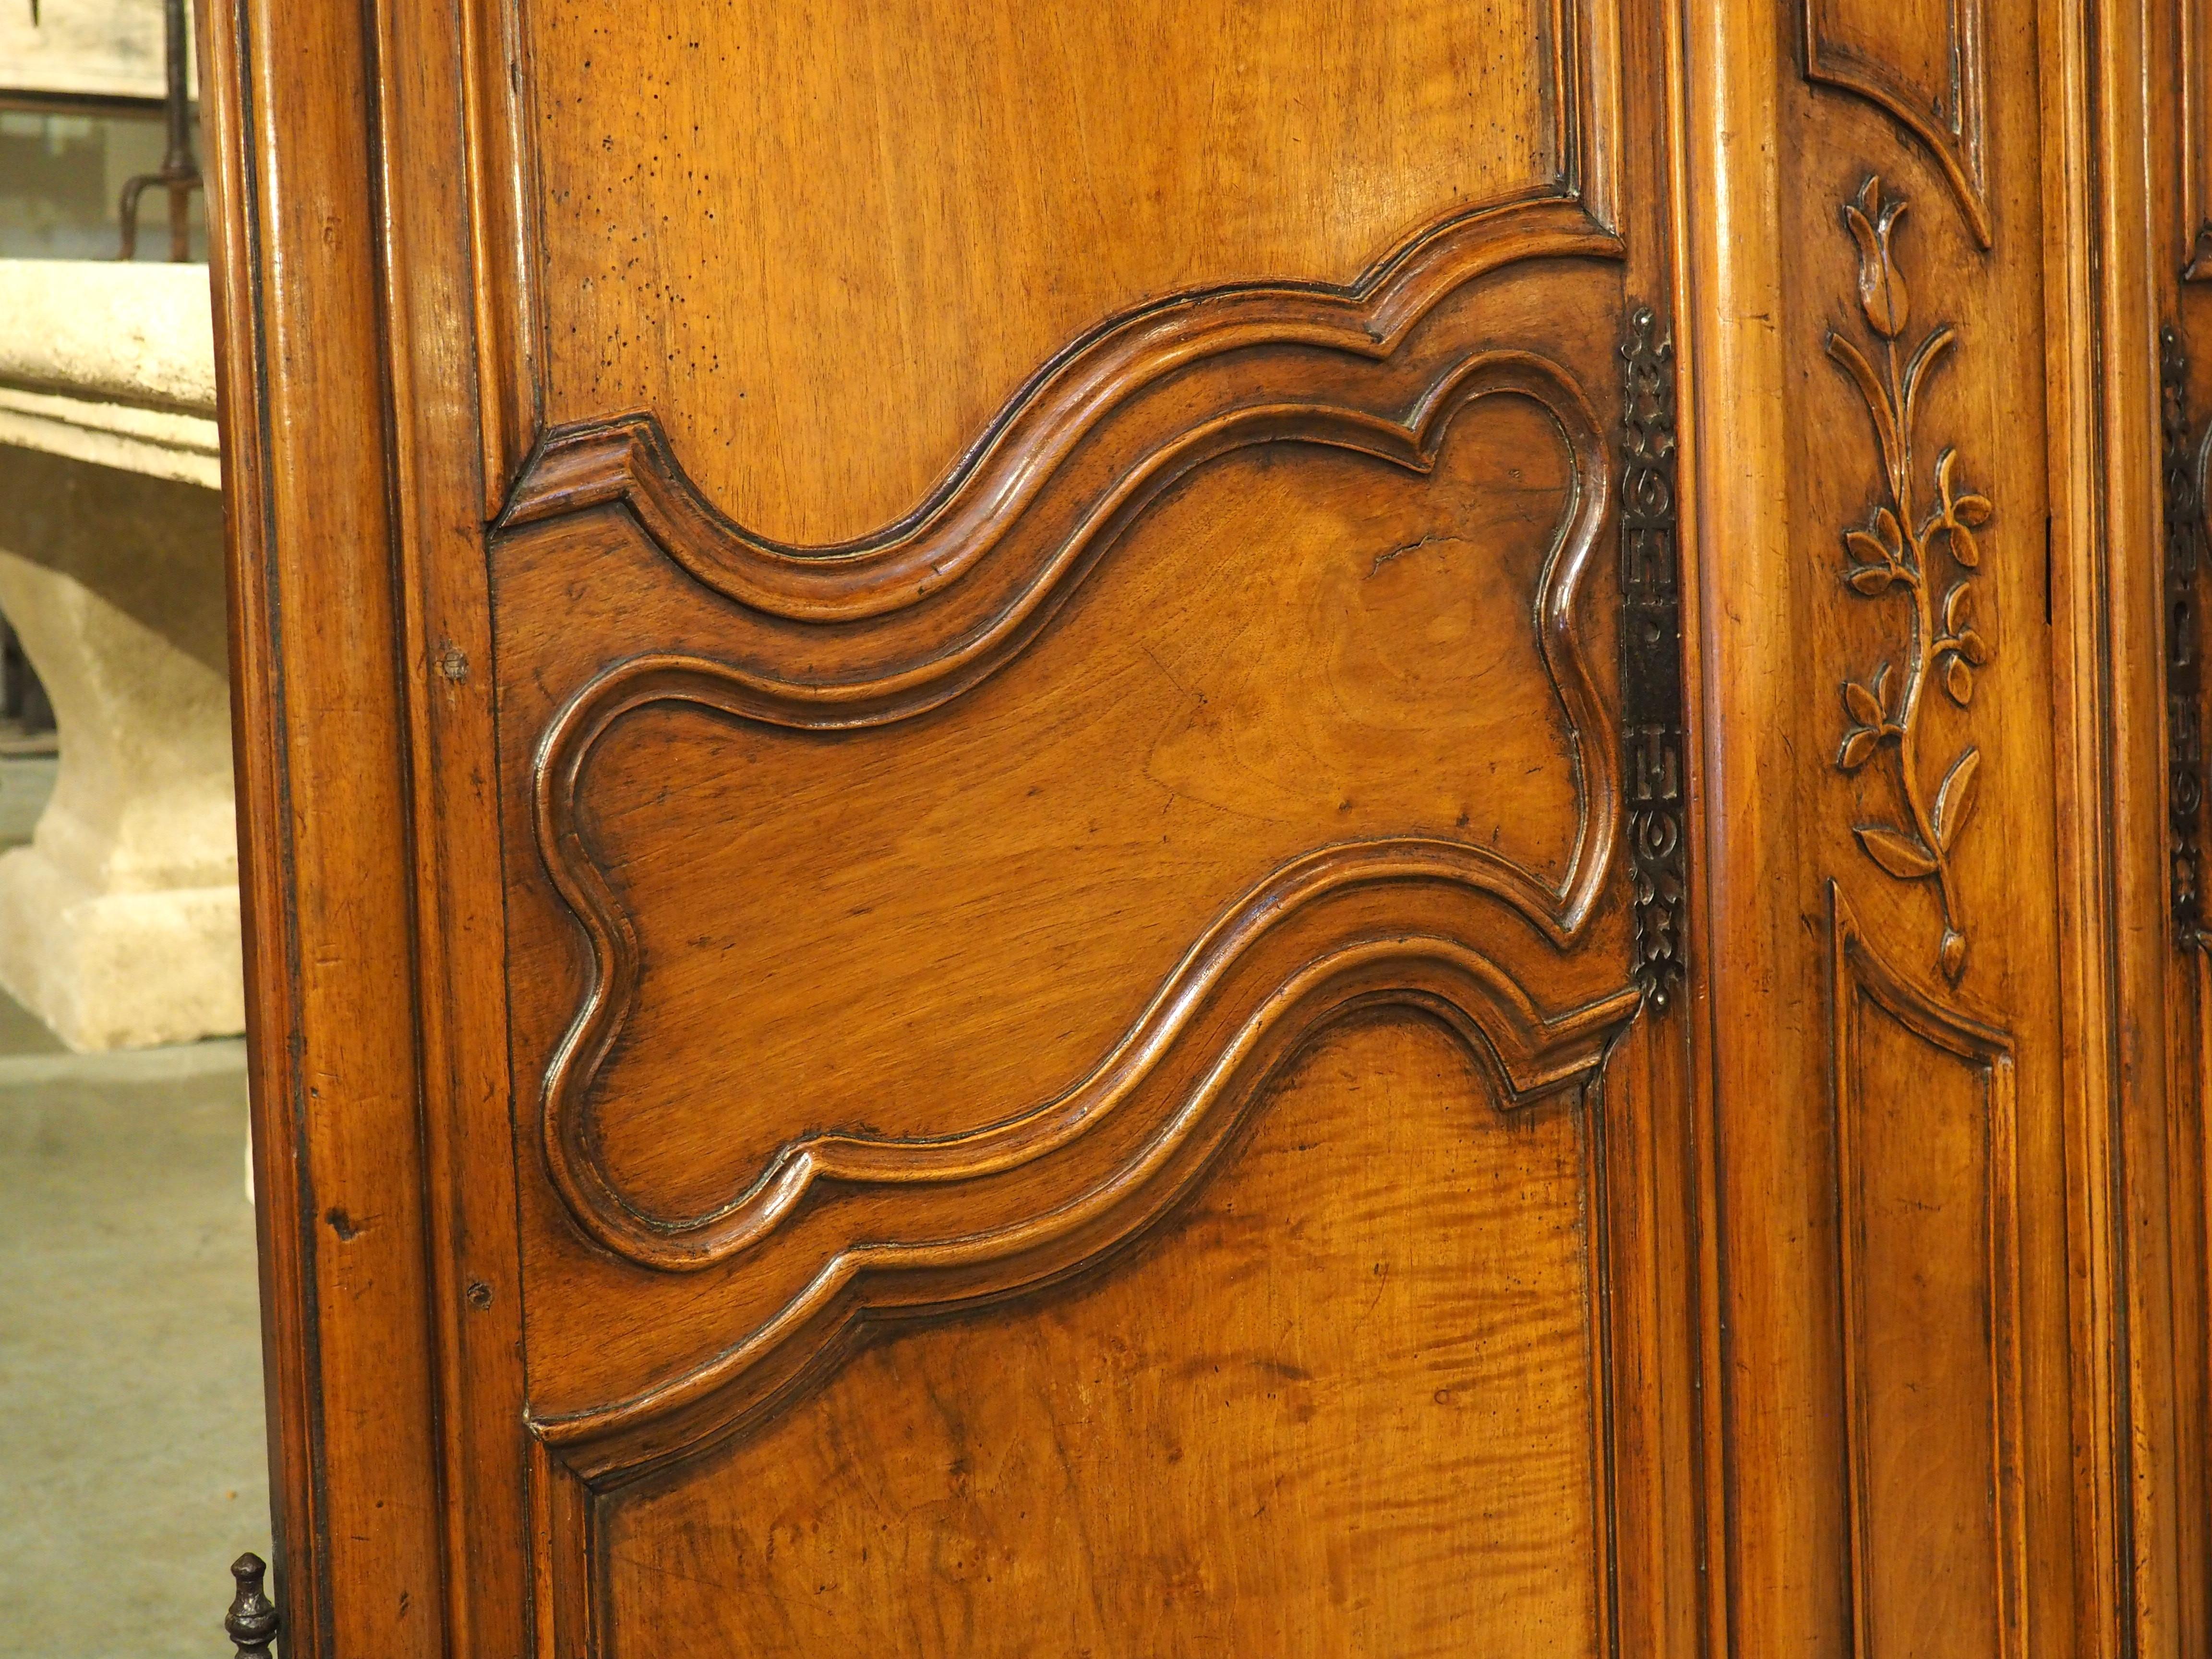 Pair of Circa 1750 Solid Walnut Façade or Cabinet Doors from Provence, France For Sale 1